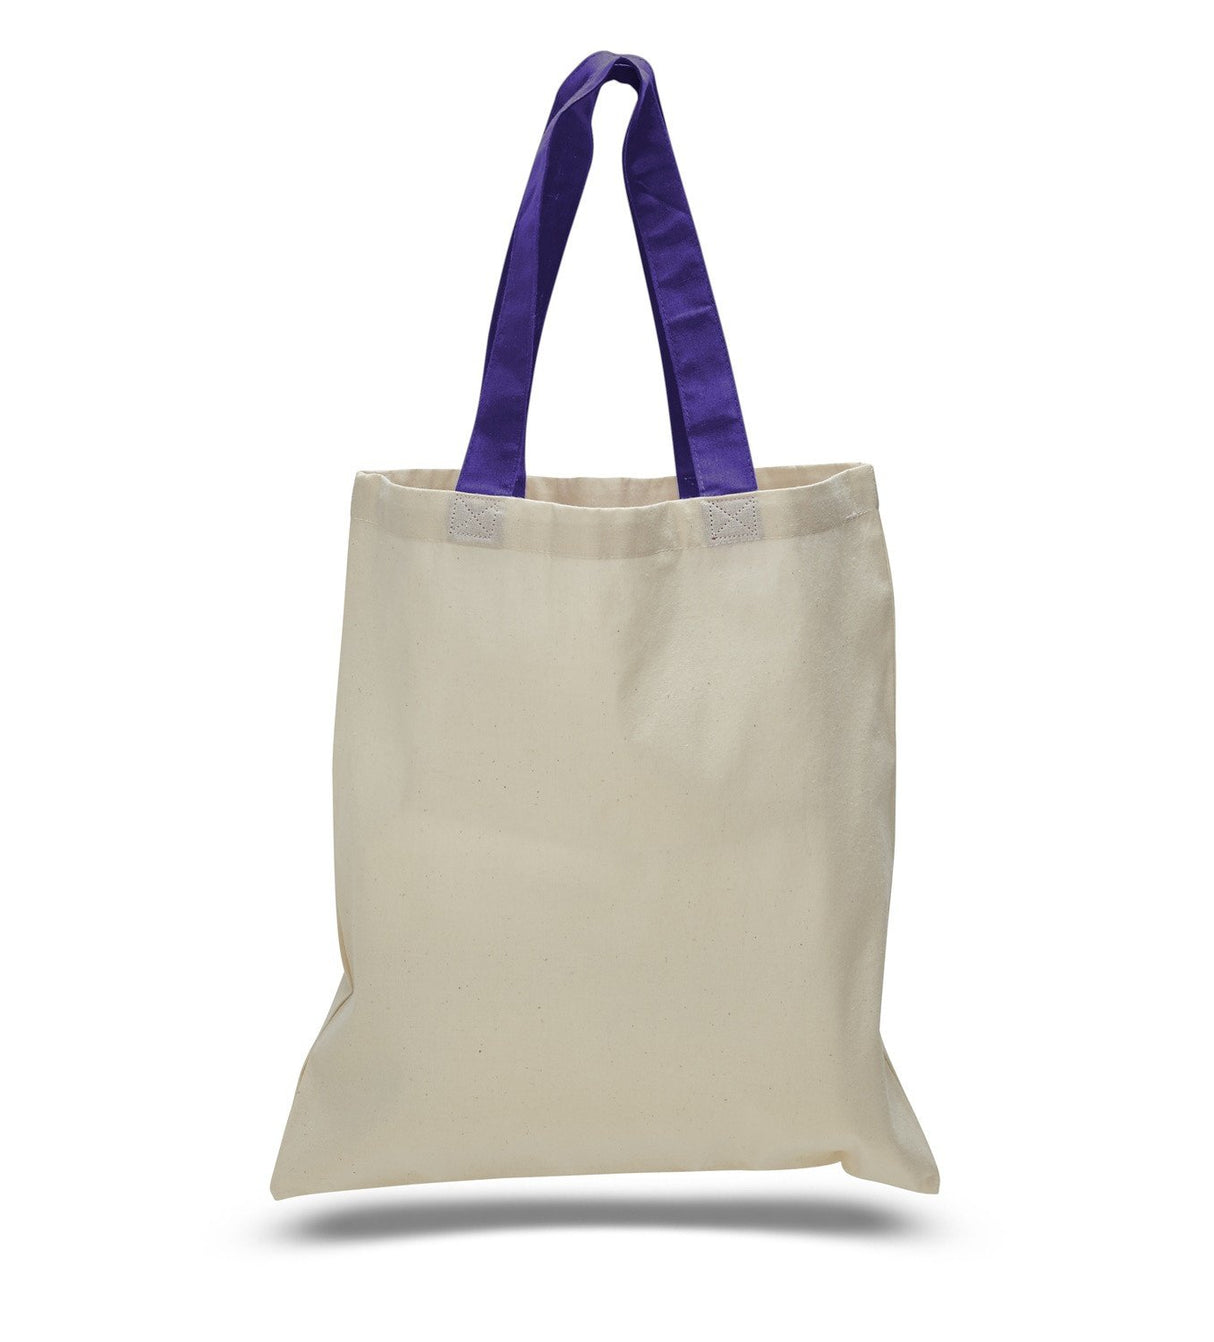 Wholesale Tote Bag With Purple Handles